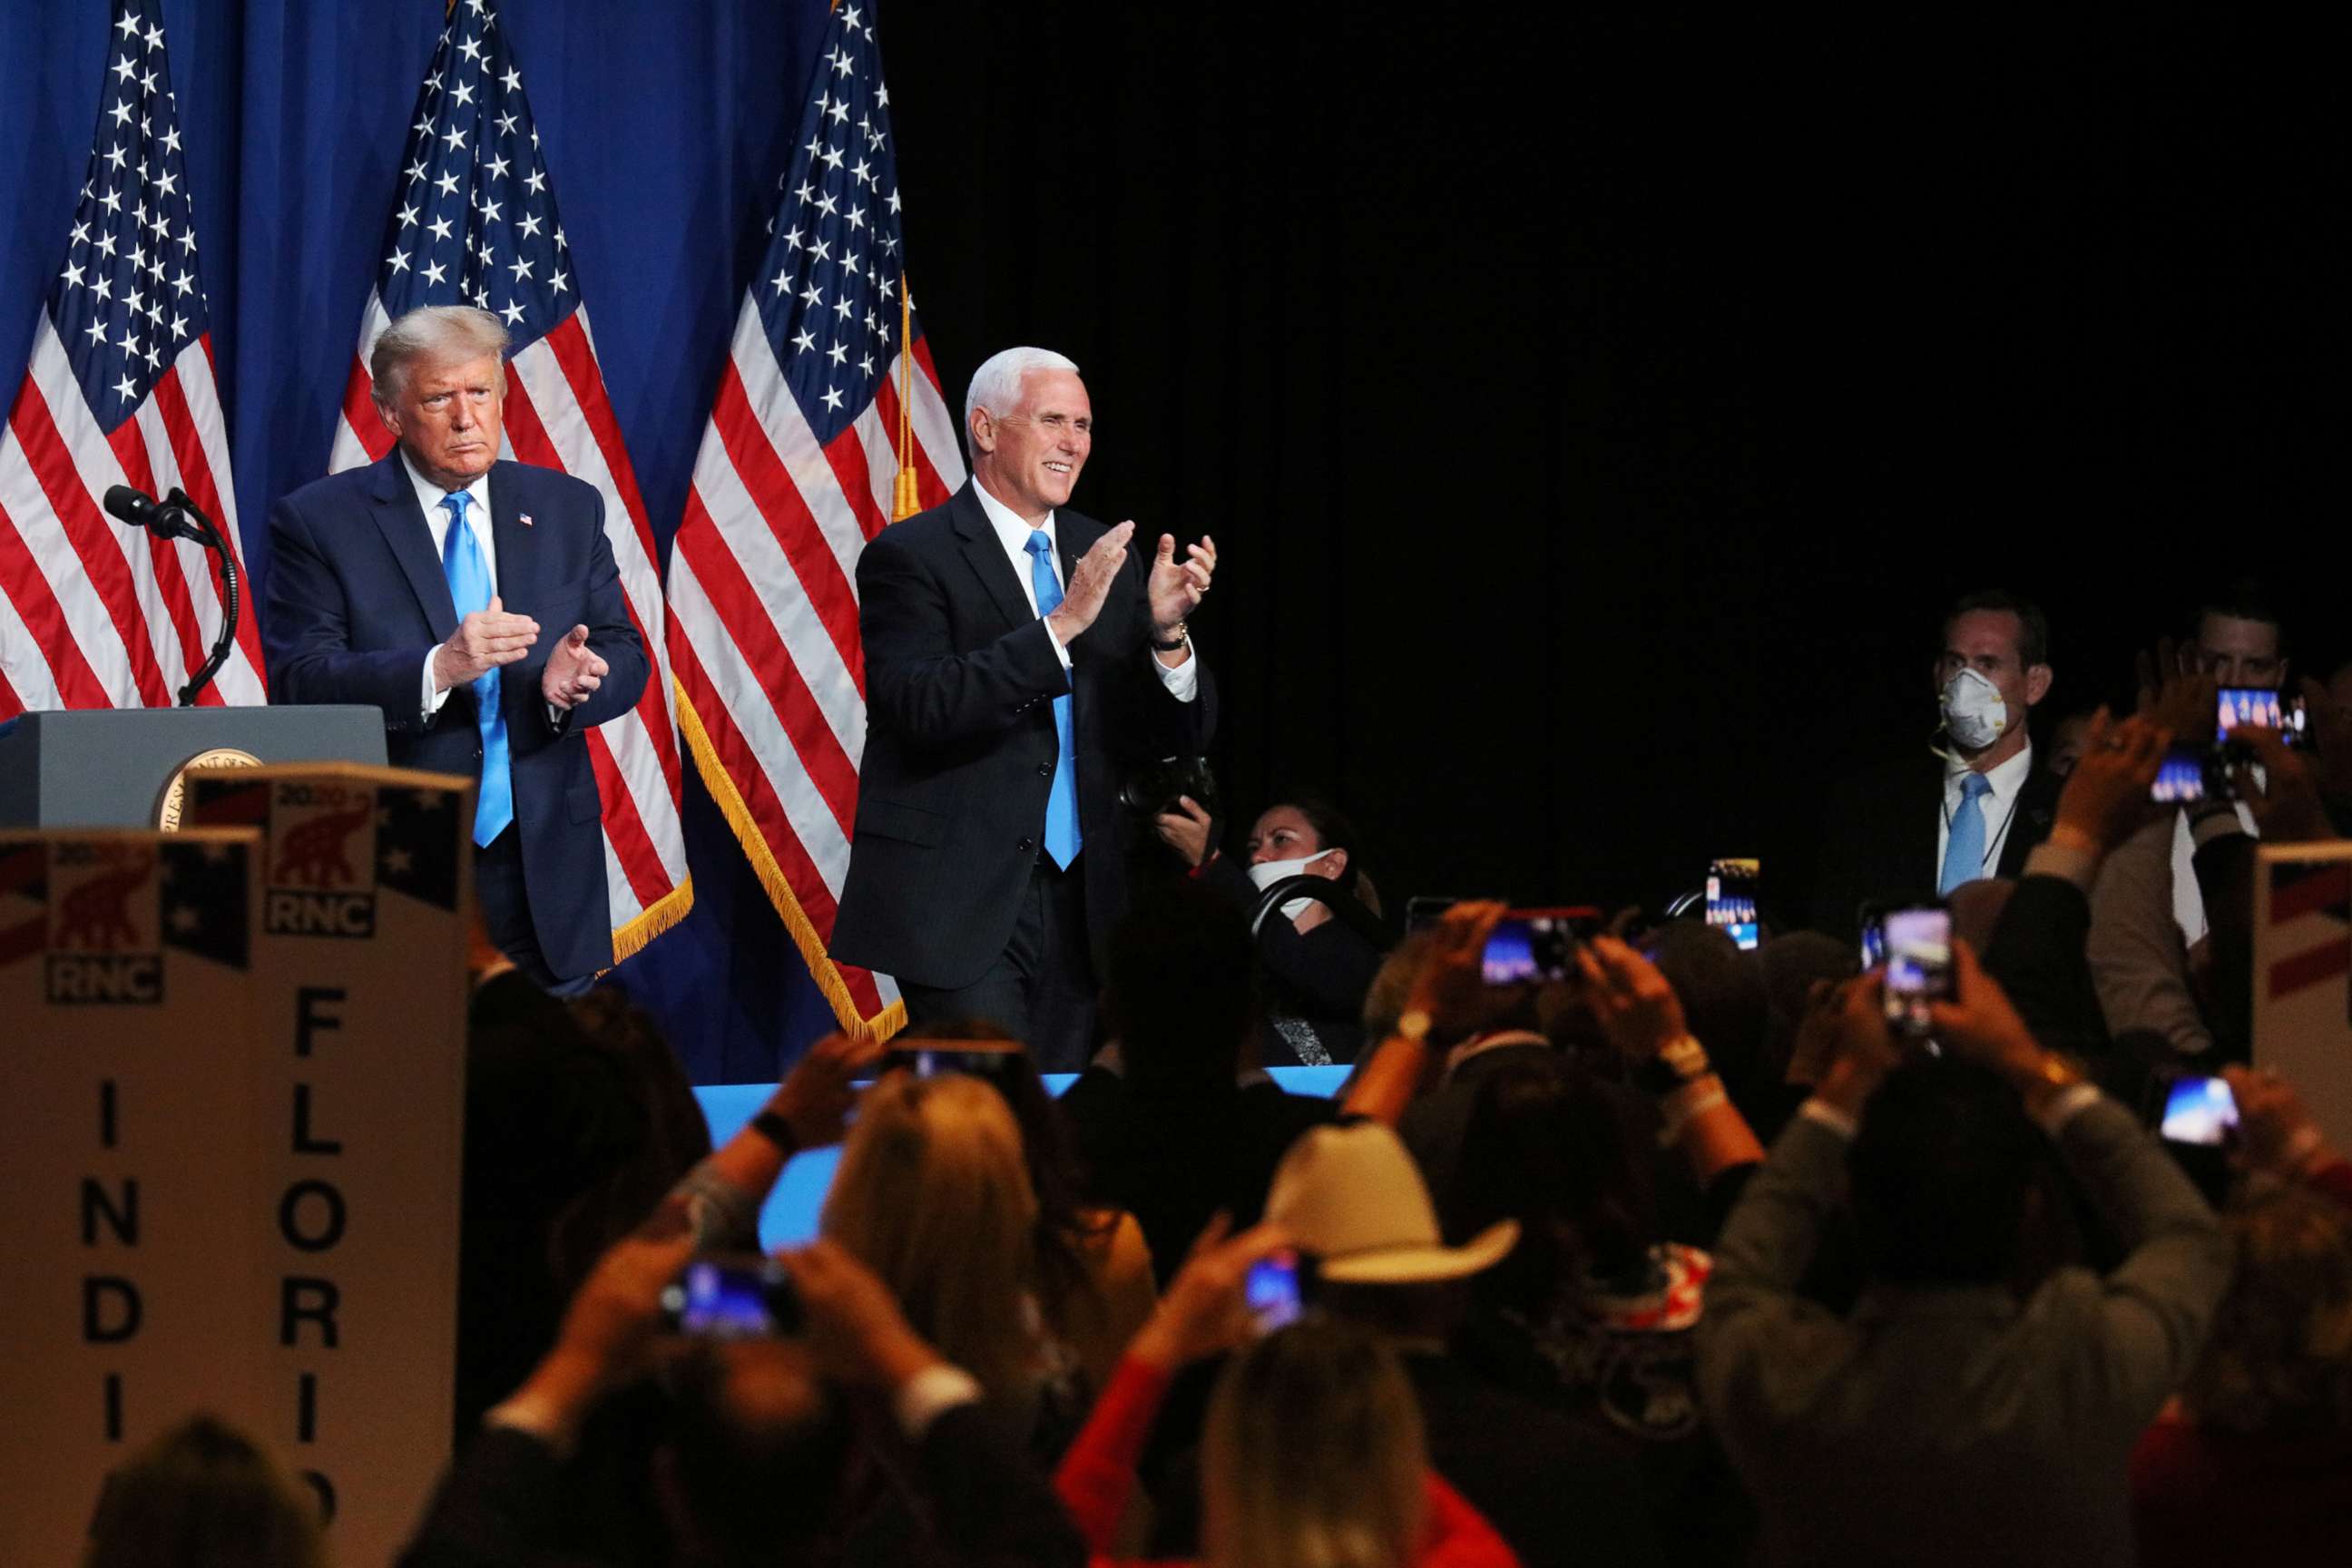 PHOTO: President Donald Trump and Vice President Pence applaud in the Charlotte Convention Center's Richardson Ballroom in Charlotte, N.C., Aug. 24, 2020.